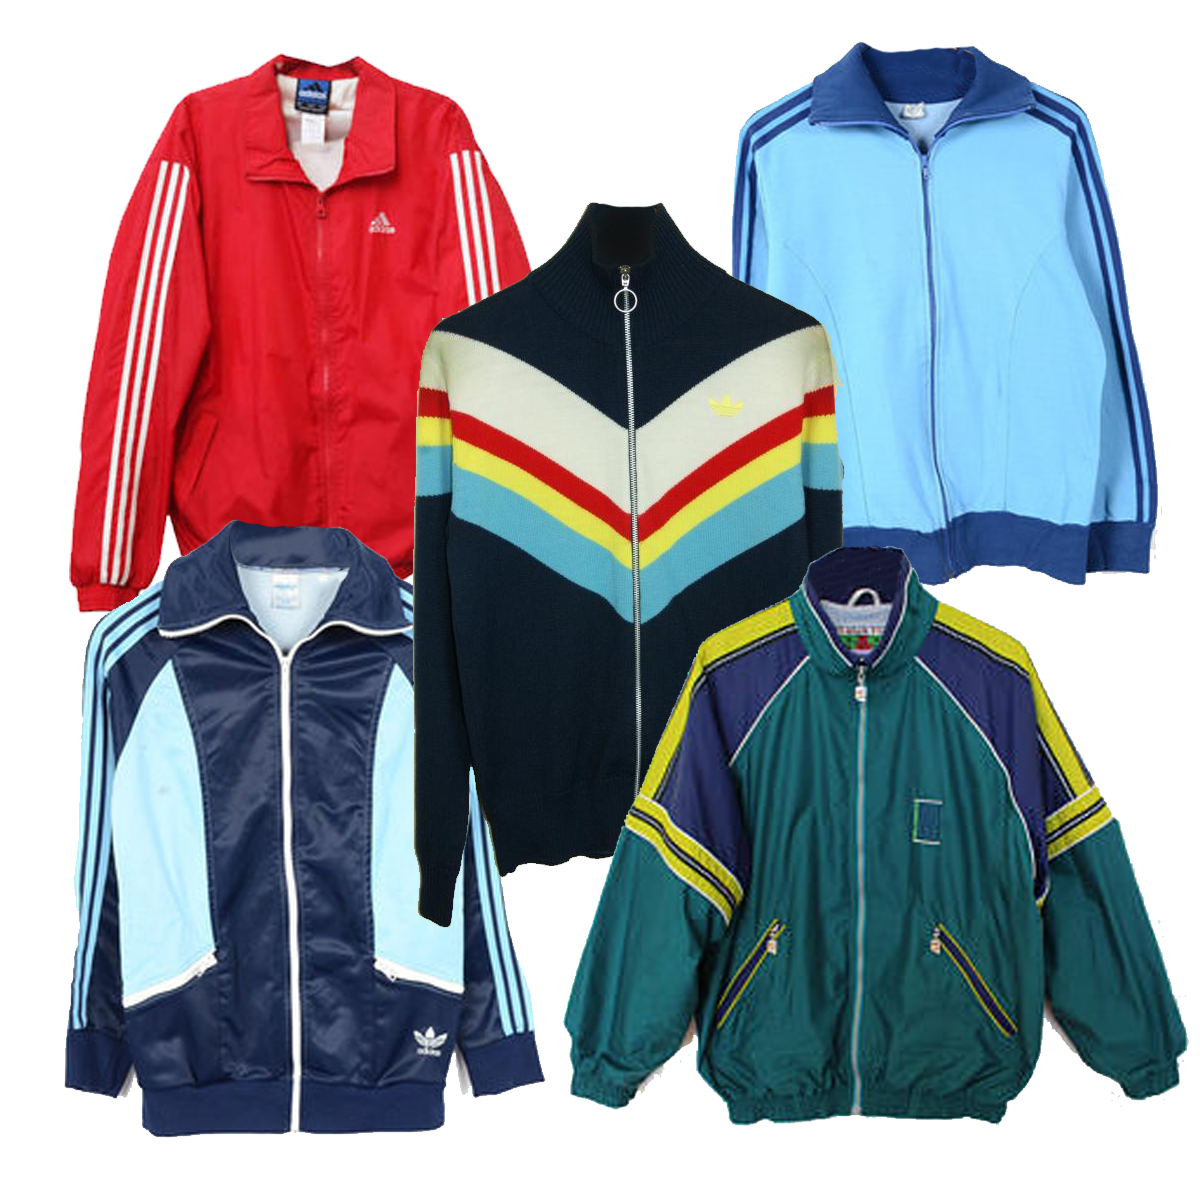 Vintage track and Field Jackets